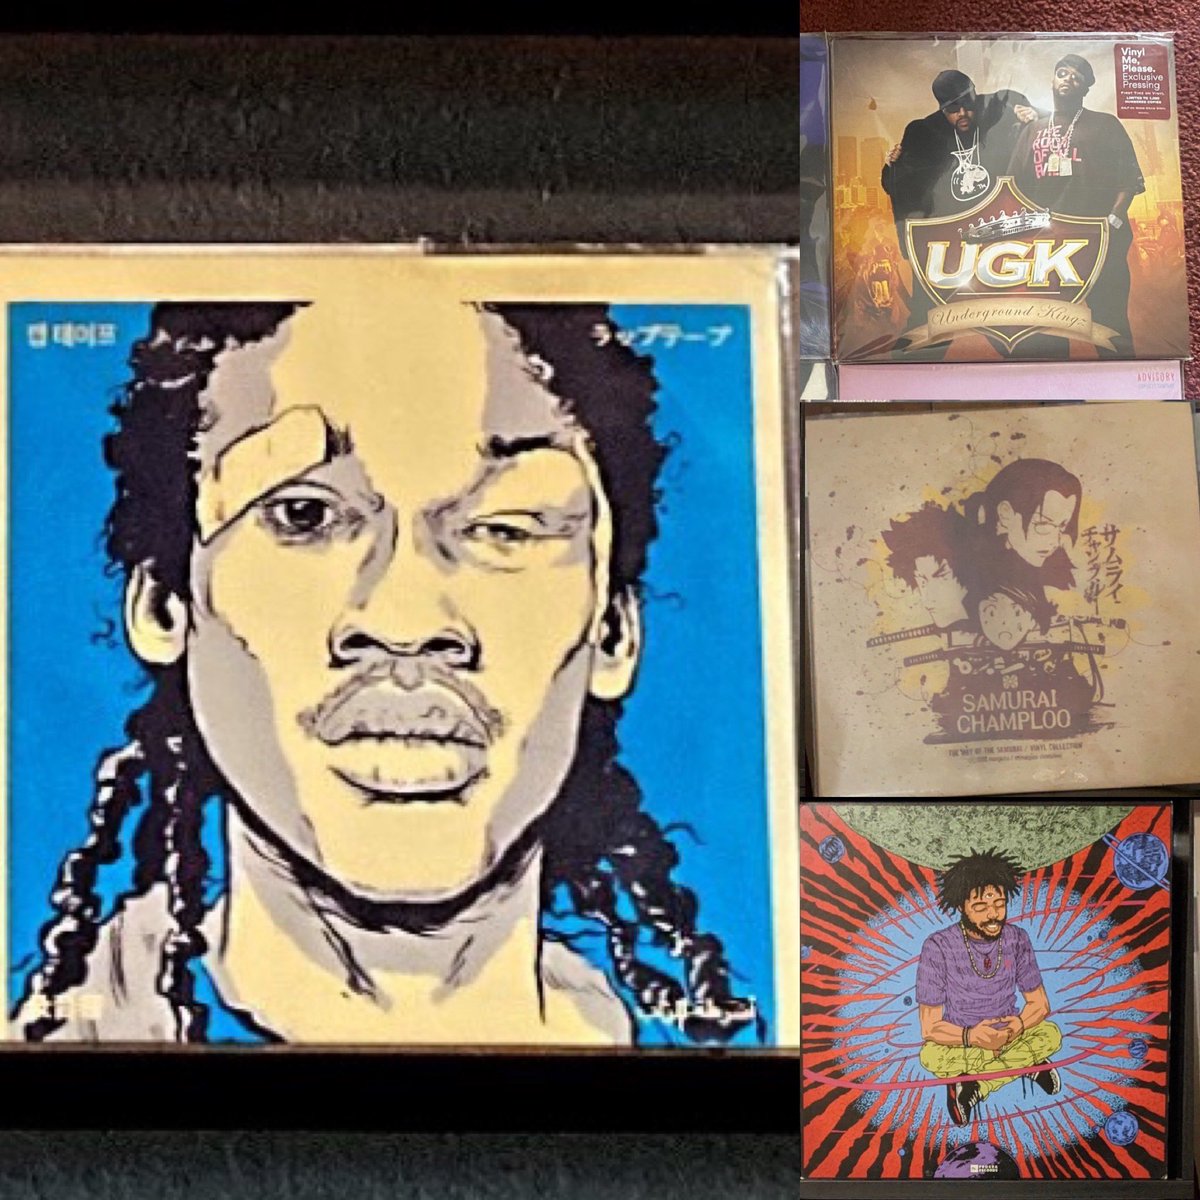 Here are a few in my collection, I dont see in other peoples collection.

Meek Vol. 5-6 - Knxwledge
Underground Kingz (VMP) - UGK
Samurai Champloo - Nujabes 
Steez Classics - Capital Steez (Steez Day exclusive)